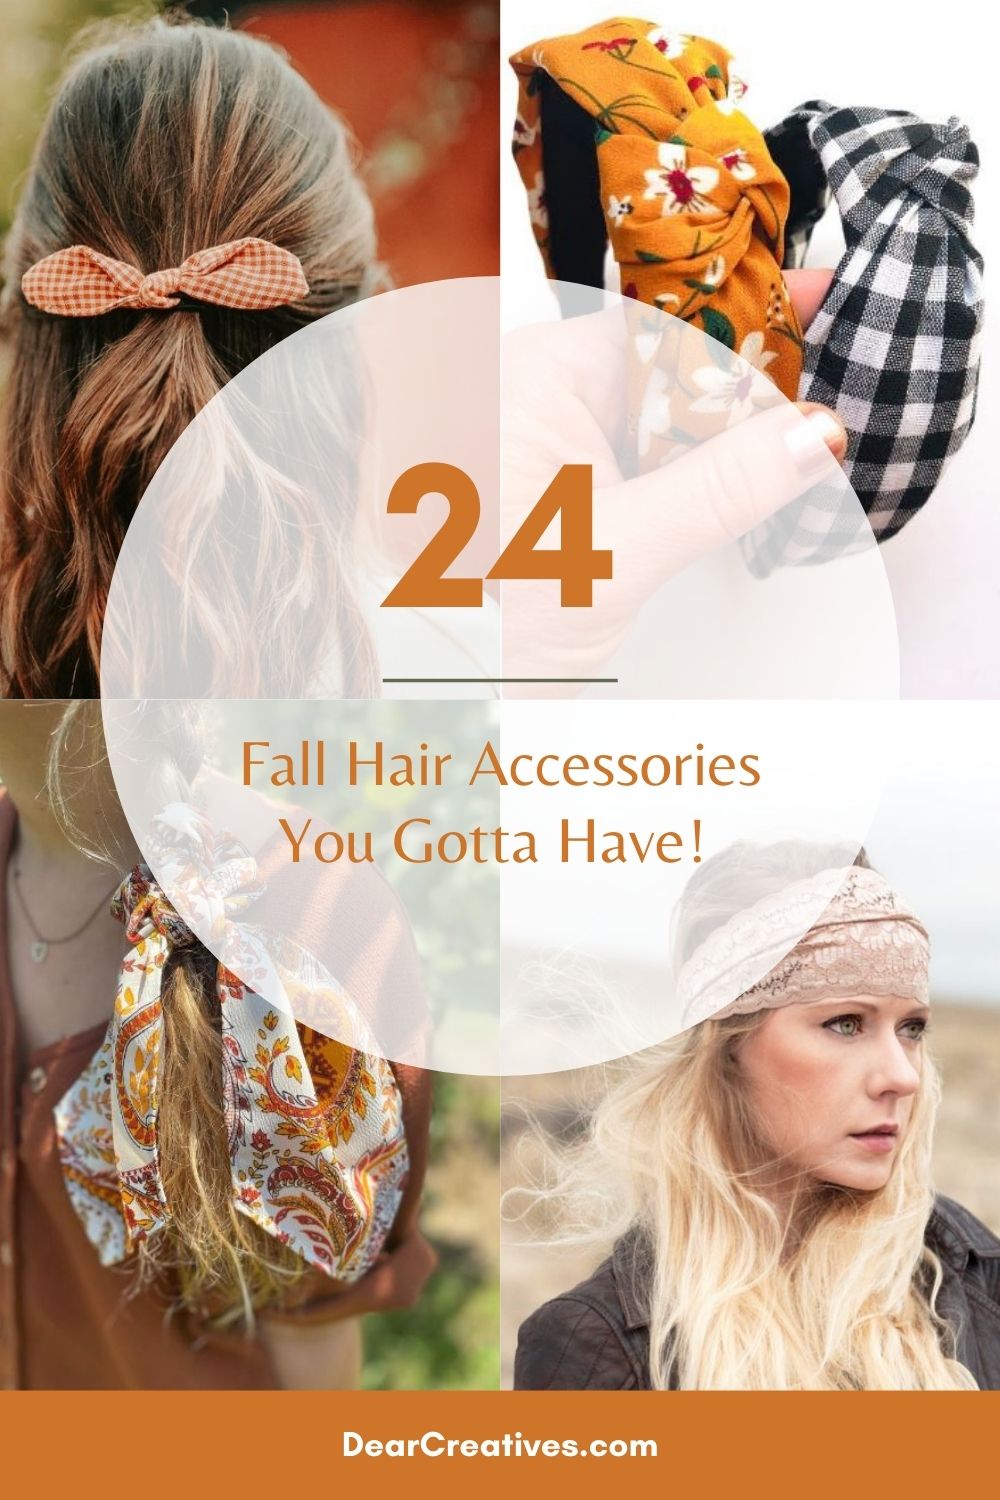 24+ Fall Hair Accessories You Gotta Have For Styling Your Hair This Fall!